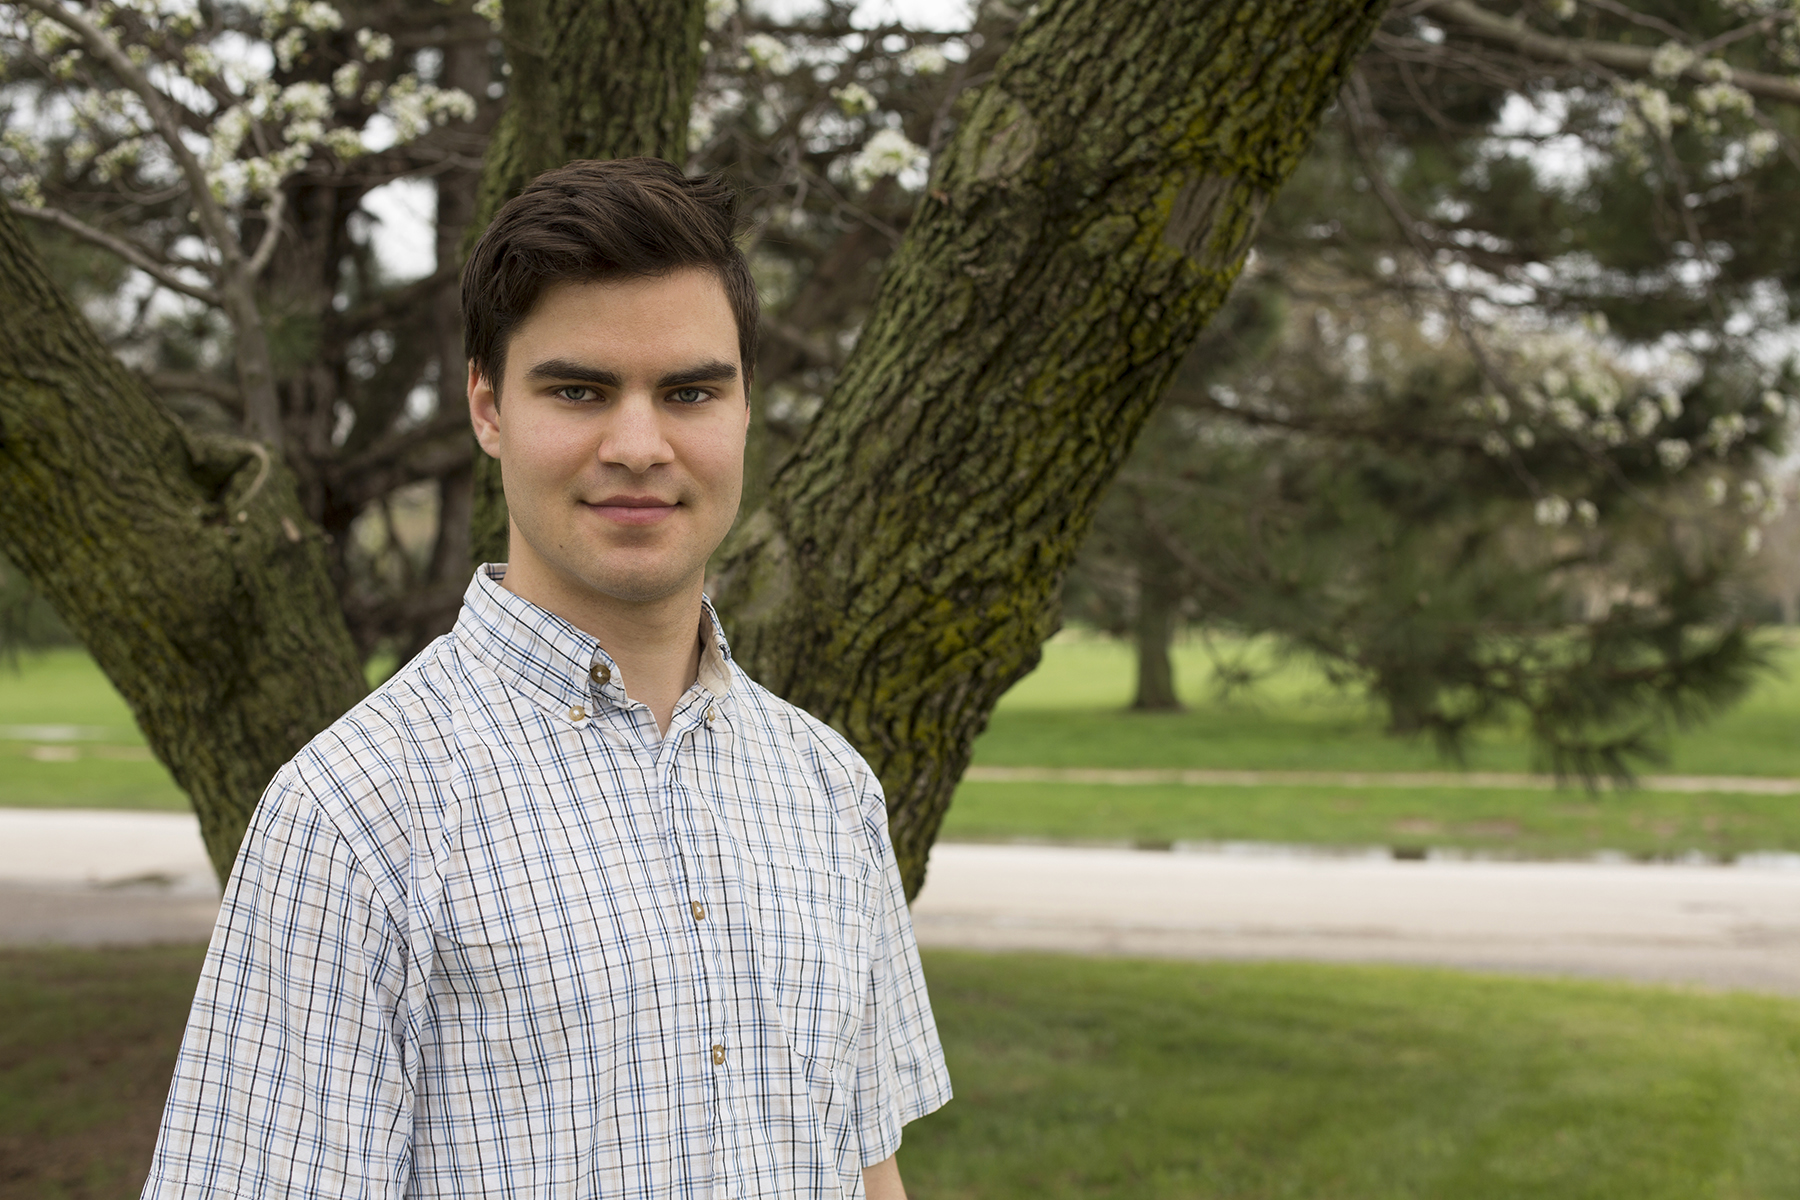 Mykhaylo M. Malakhov is an Andrews University student who awarded the Barry Goldwater Scholarship